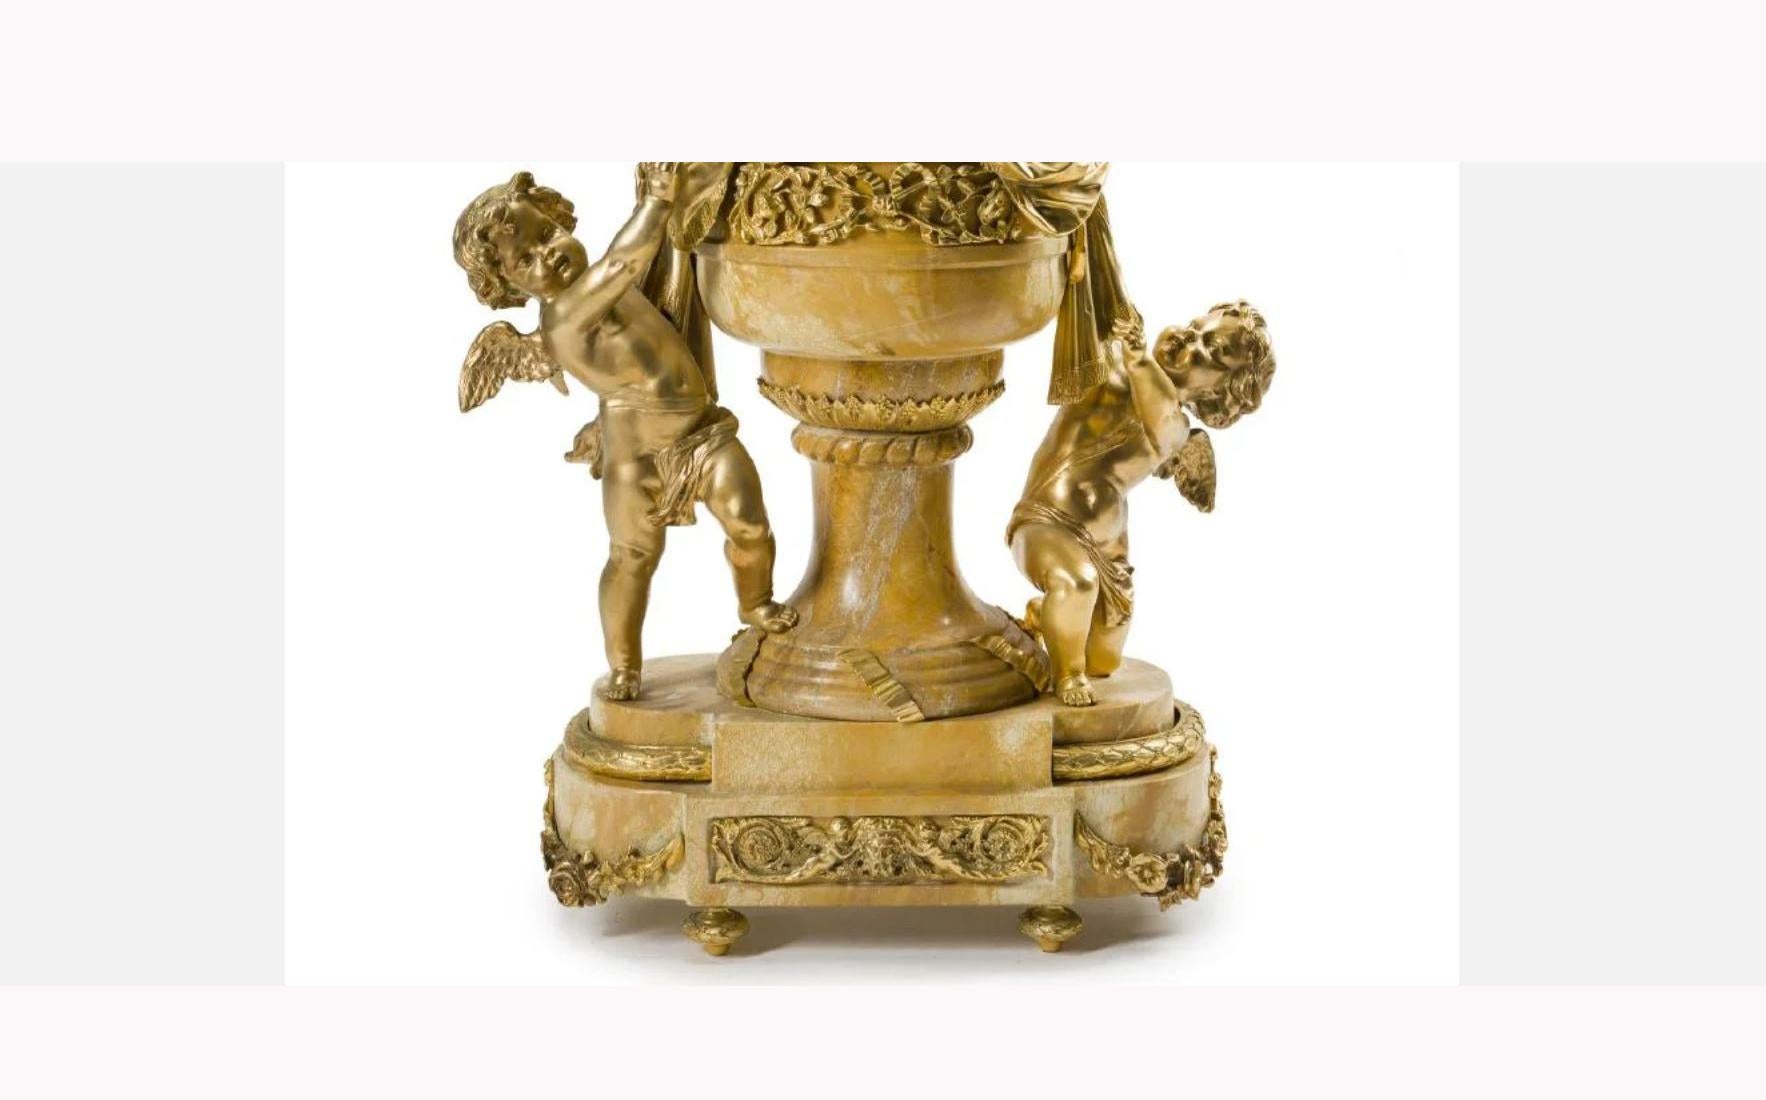 20th Century French Ormolu Mounted Siena Marble Figural Centerpiece